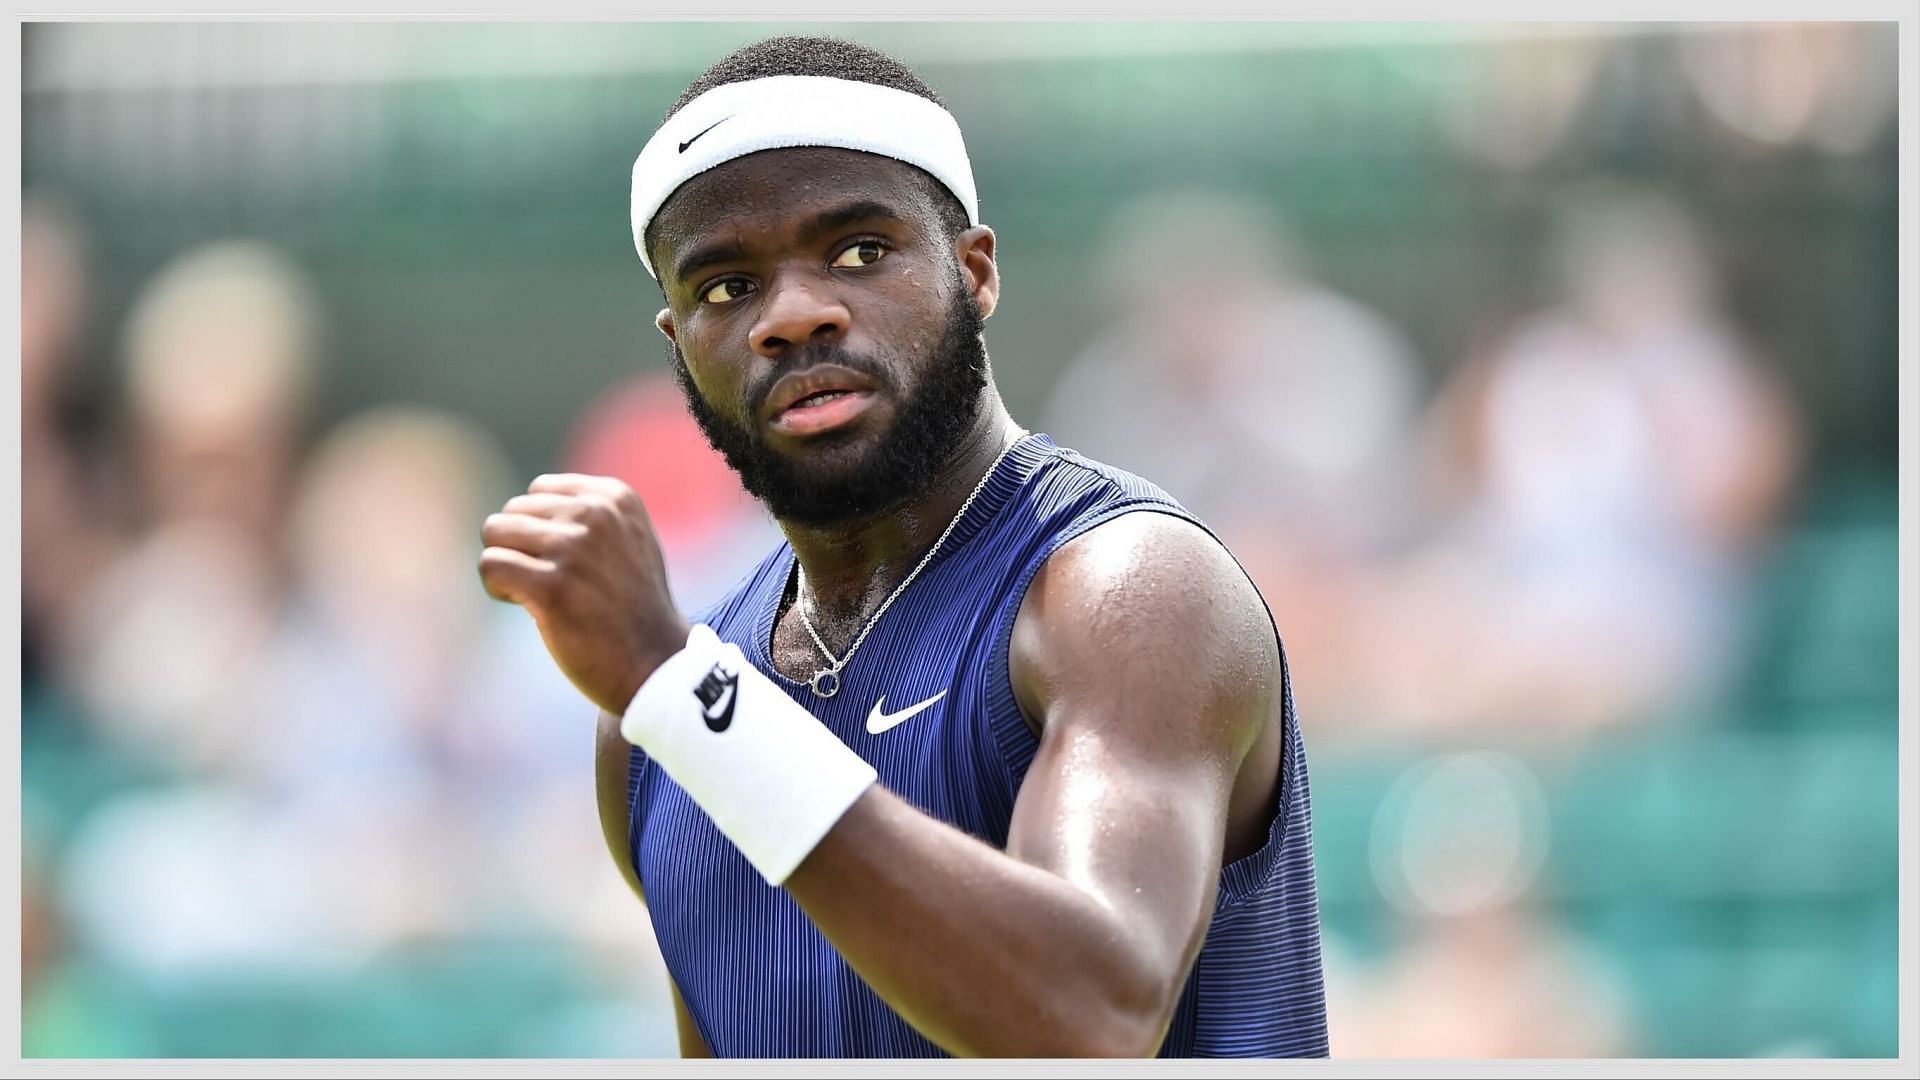 Tiafoe was indiscreet with his remarks in a recent press conference